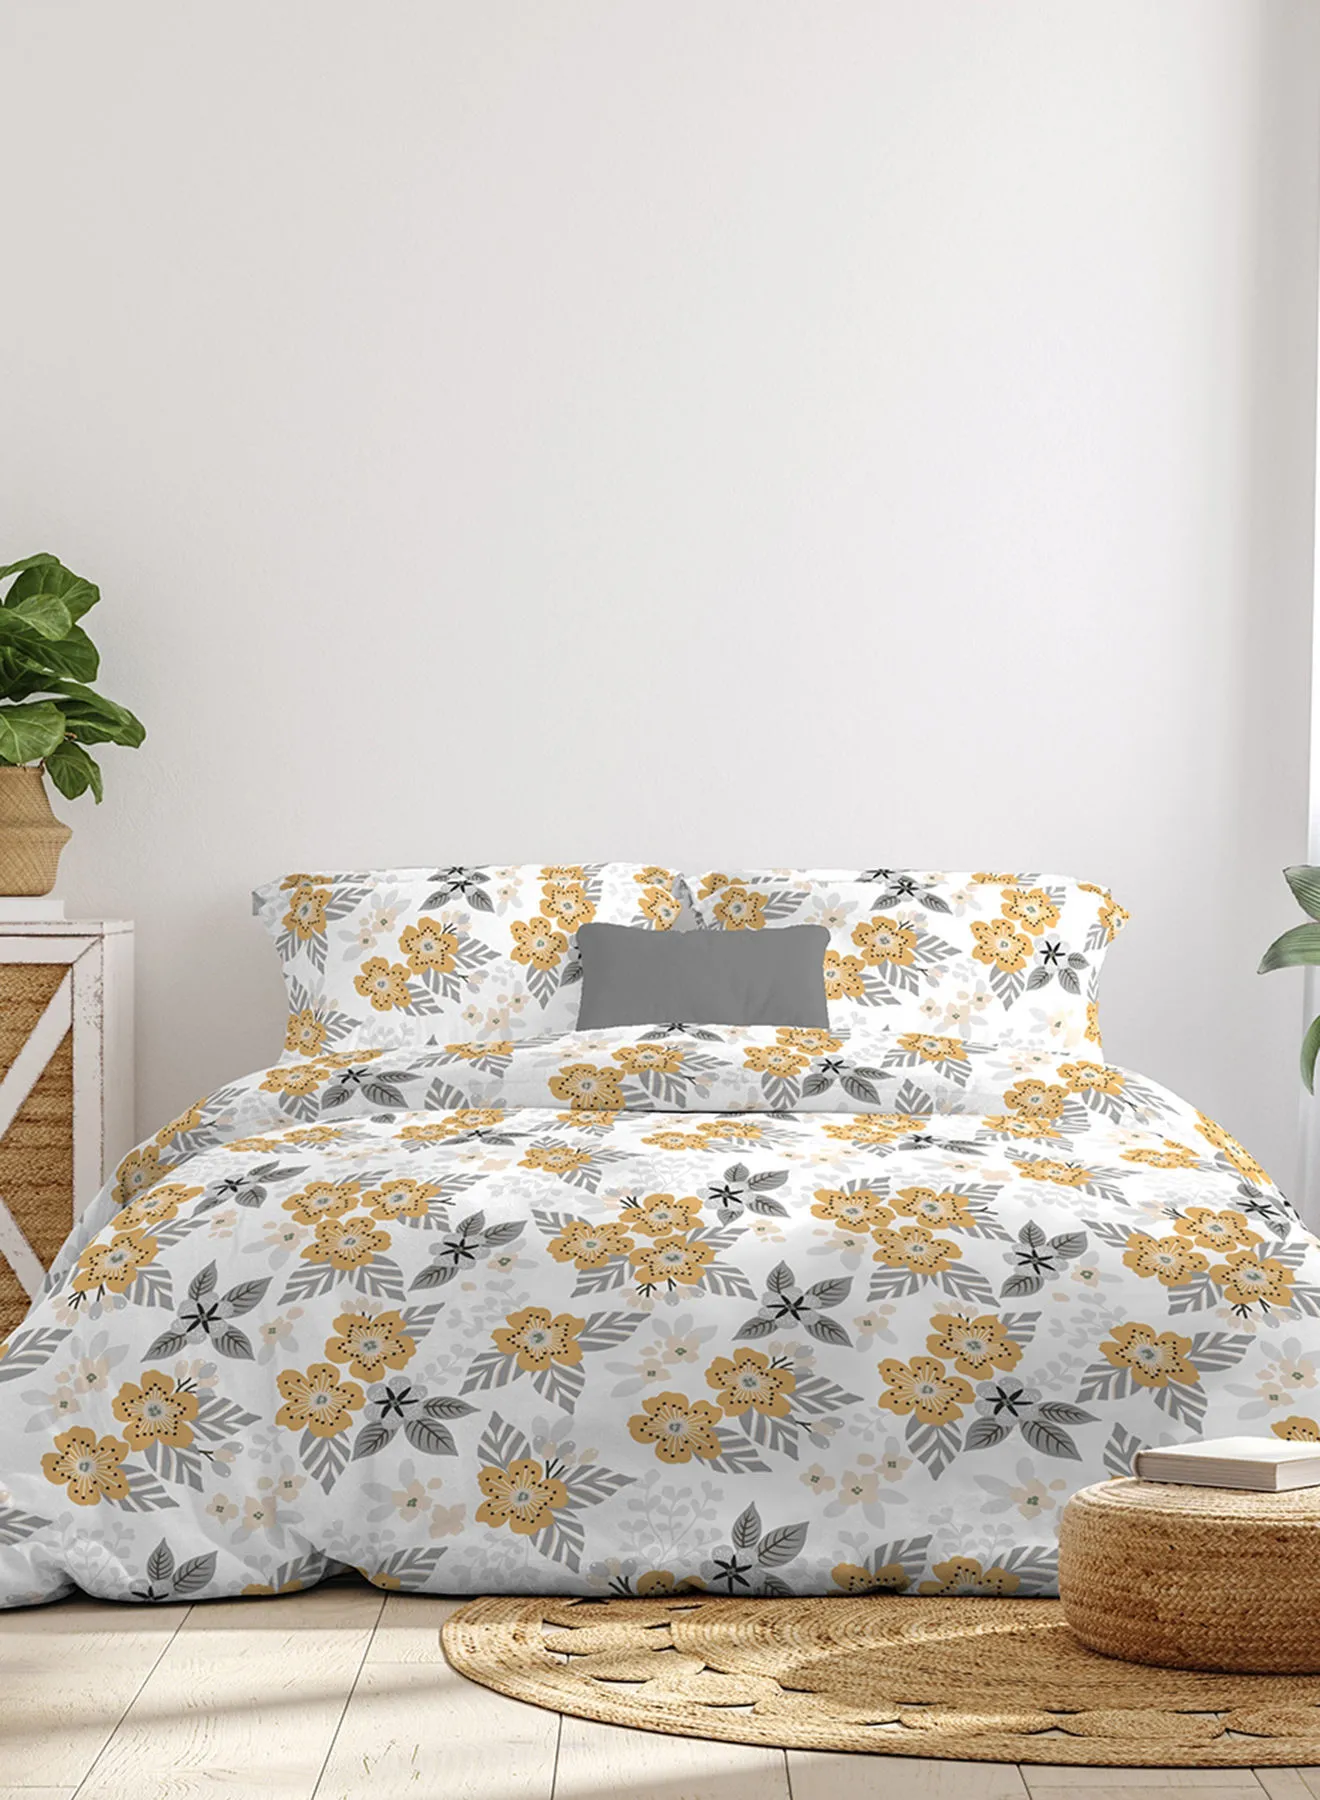 Amal Comforter Set King Size All Season Everyday Use Bedding Set 100% Cotton 3 Pieces 1 Comforter 2 Pillow Covers  White/Gold/Grey